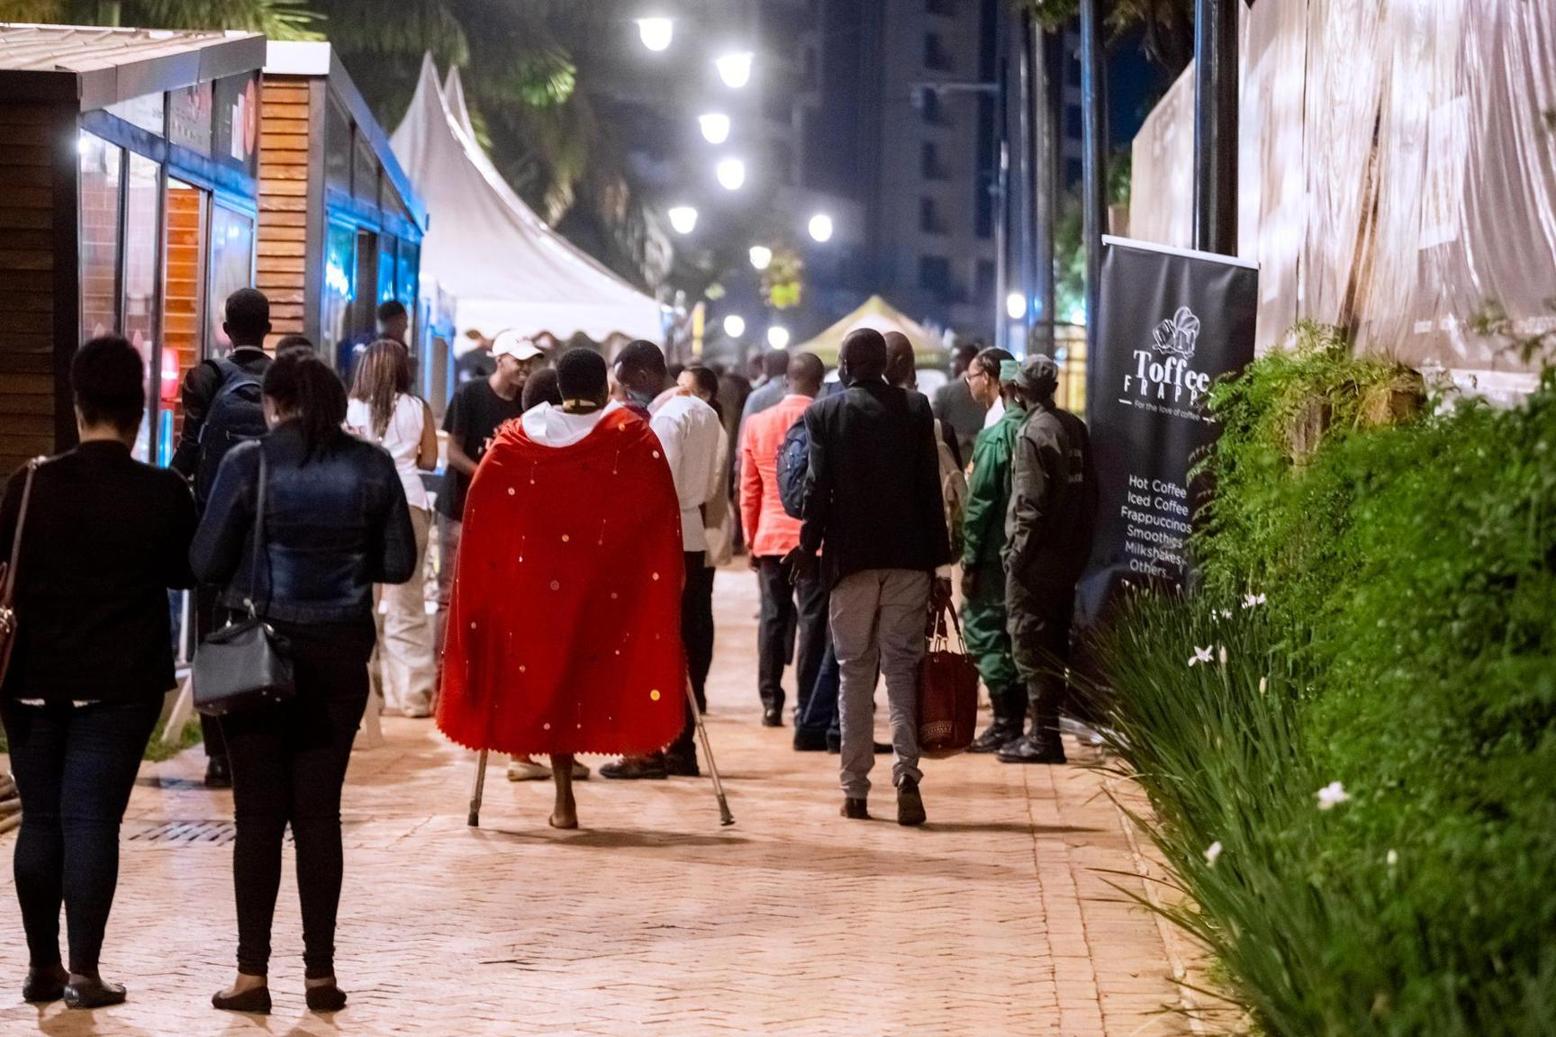 City of Kigali to invest Rwf600m in extending Imbuga City Walk